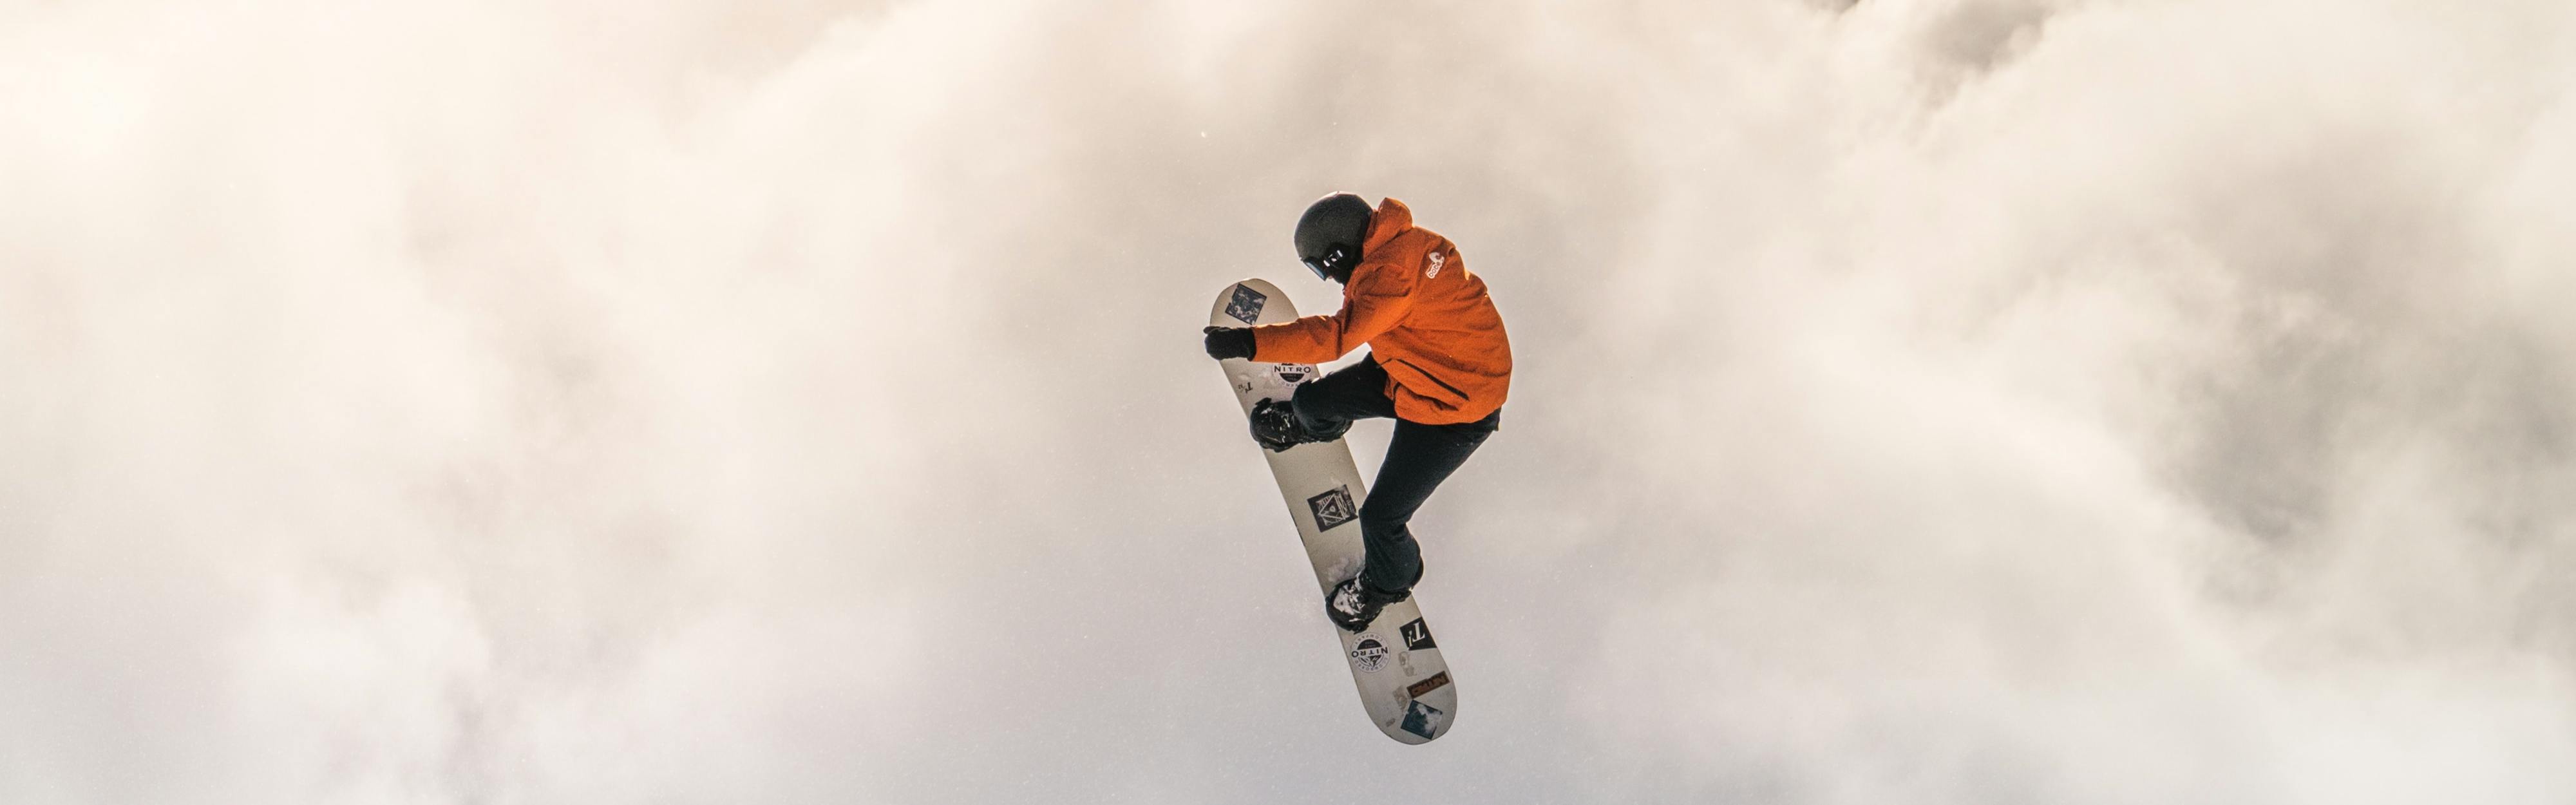 A snowboarder grabs his snowboard while in the air. 